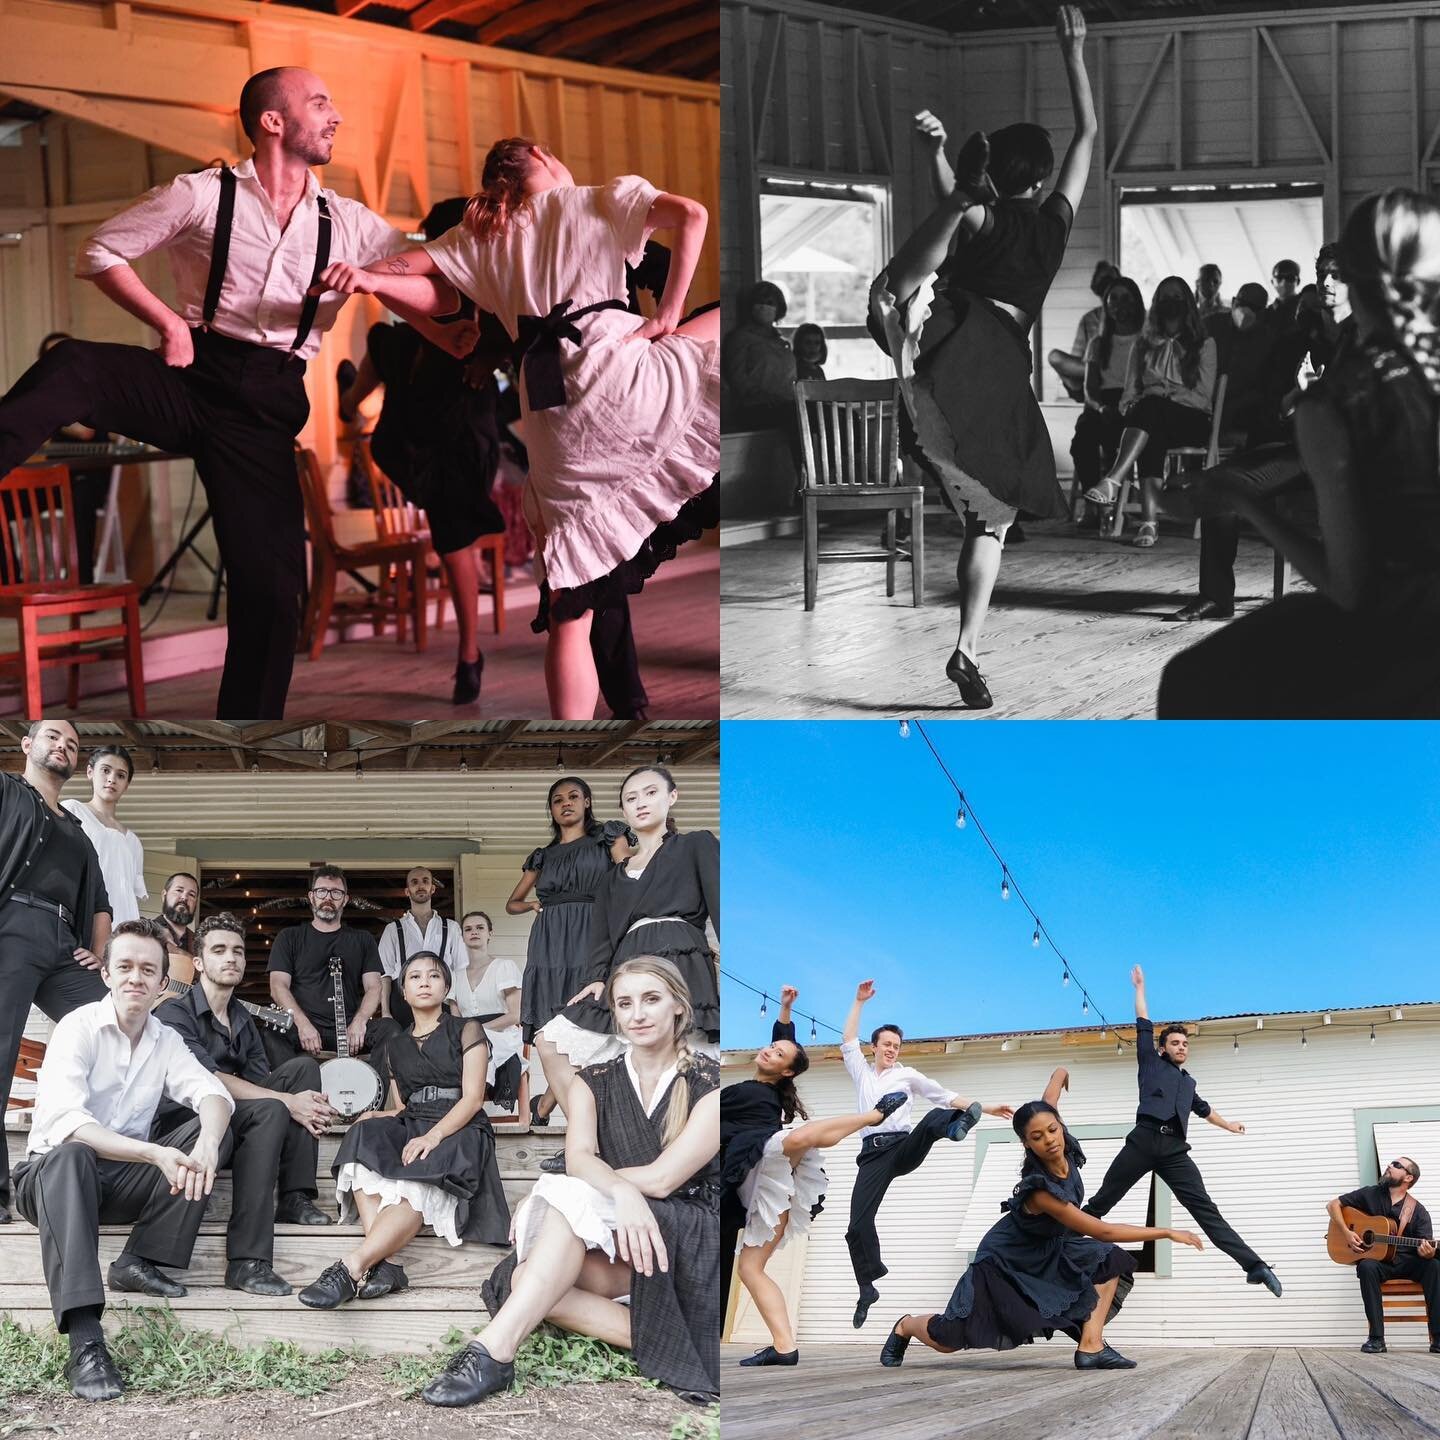 Two of our productions, BLUEGRASS JUNCTION and THE MAD SCENE, were nominated for Best Dance Production at the 2022 Broadway World Austin Awards!

Congratulations to the winners. Link to full list of awardees in our bio.

photos from Bluegrass Junctio